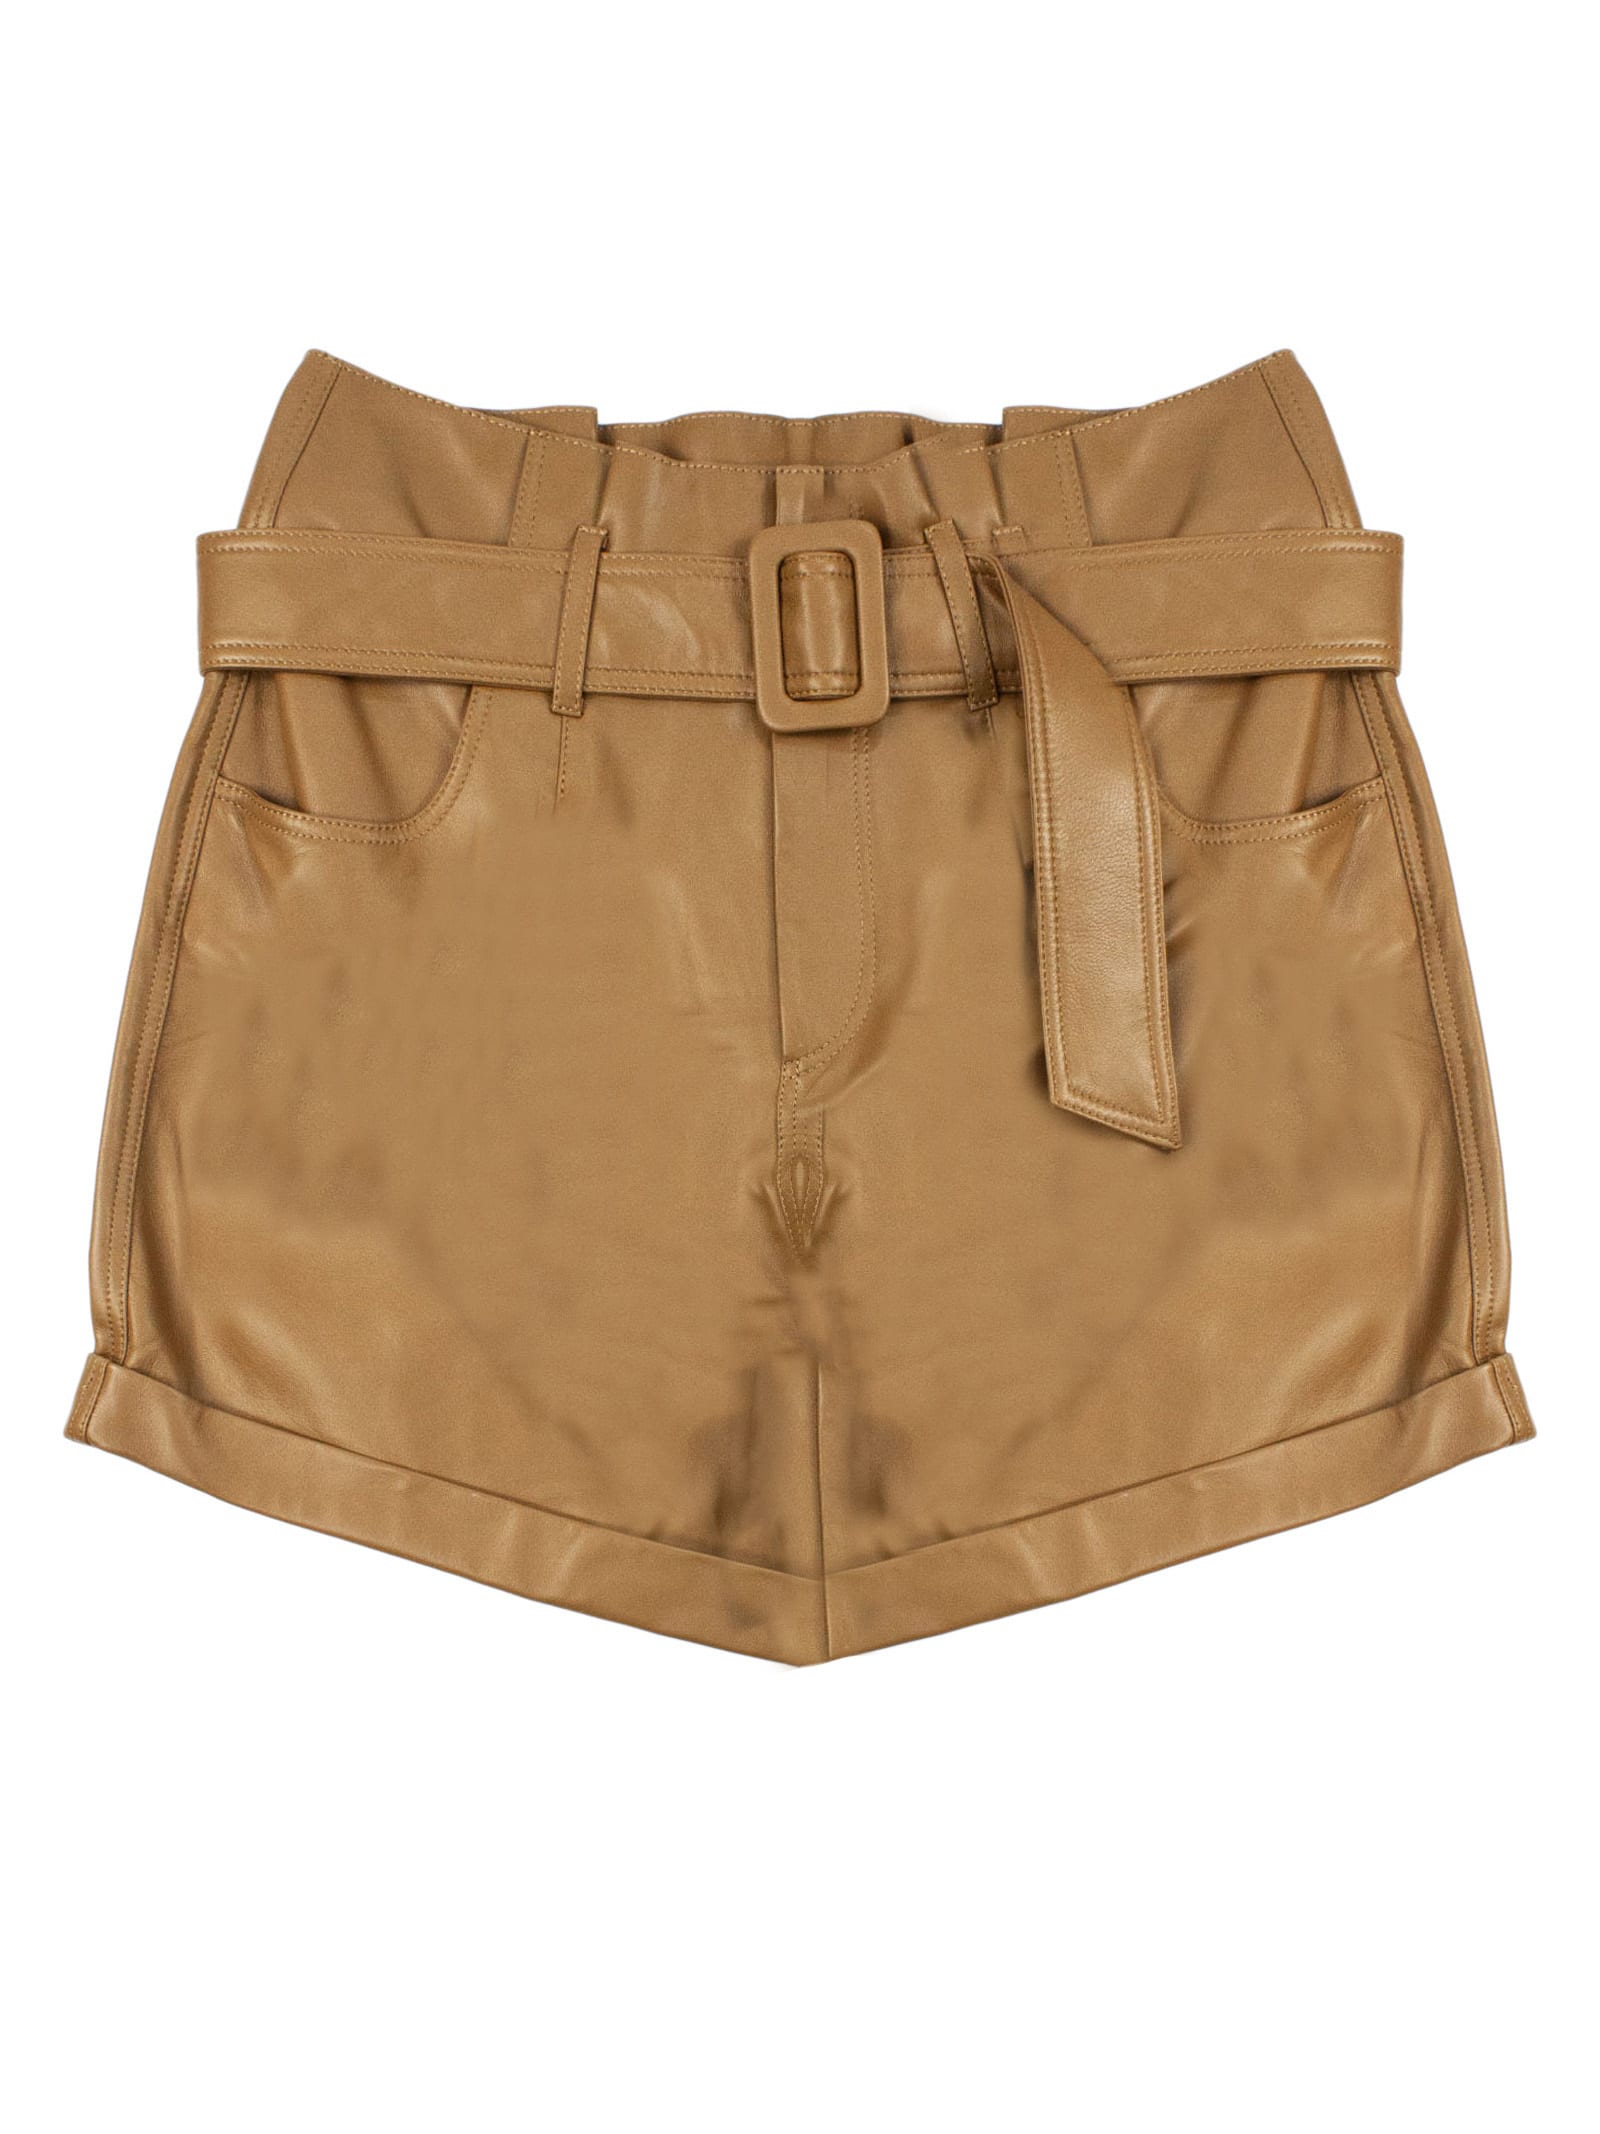 Federica Tosi Camel Leather Shorts